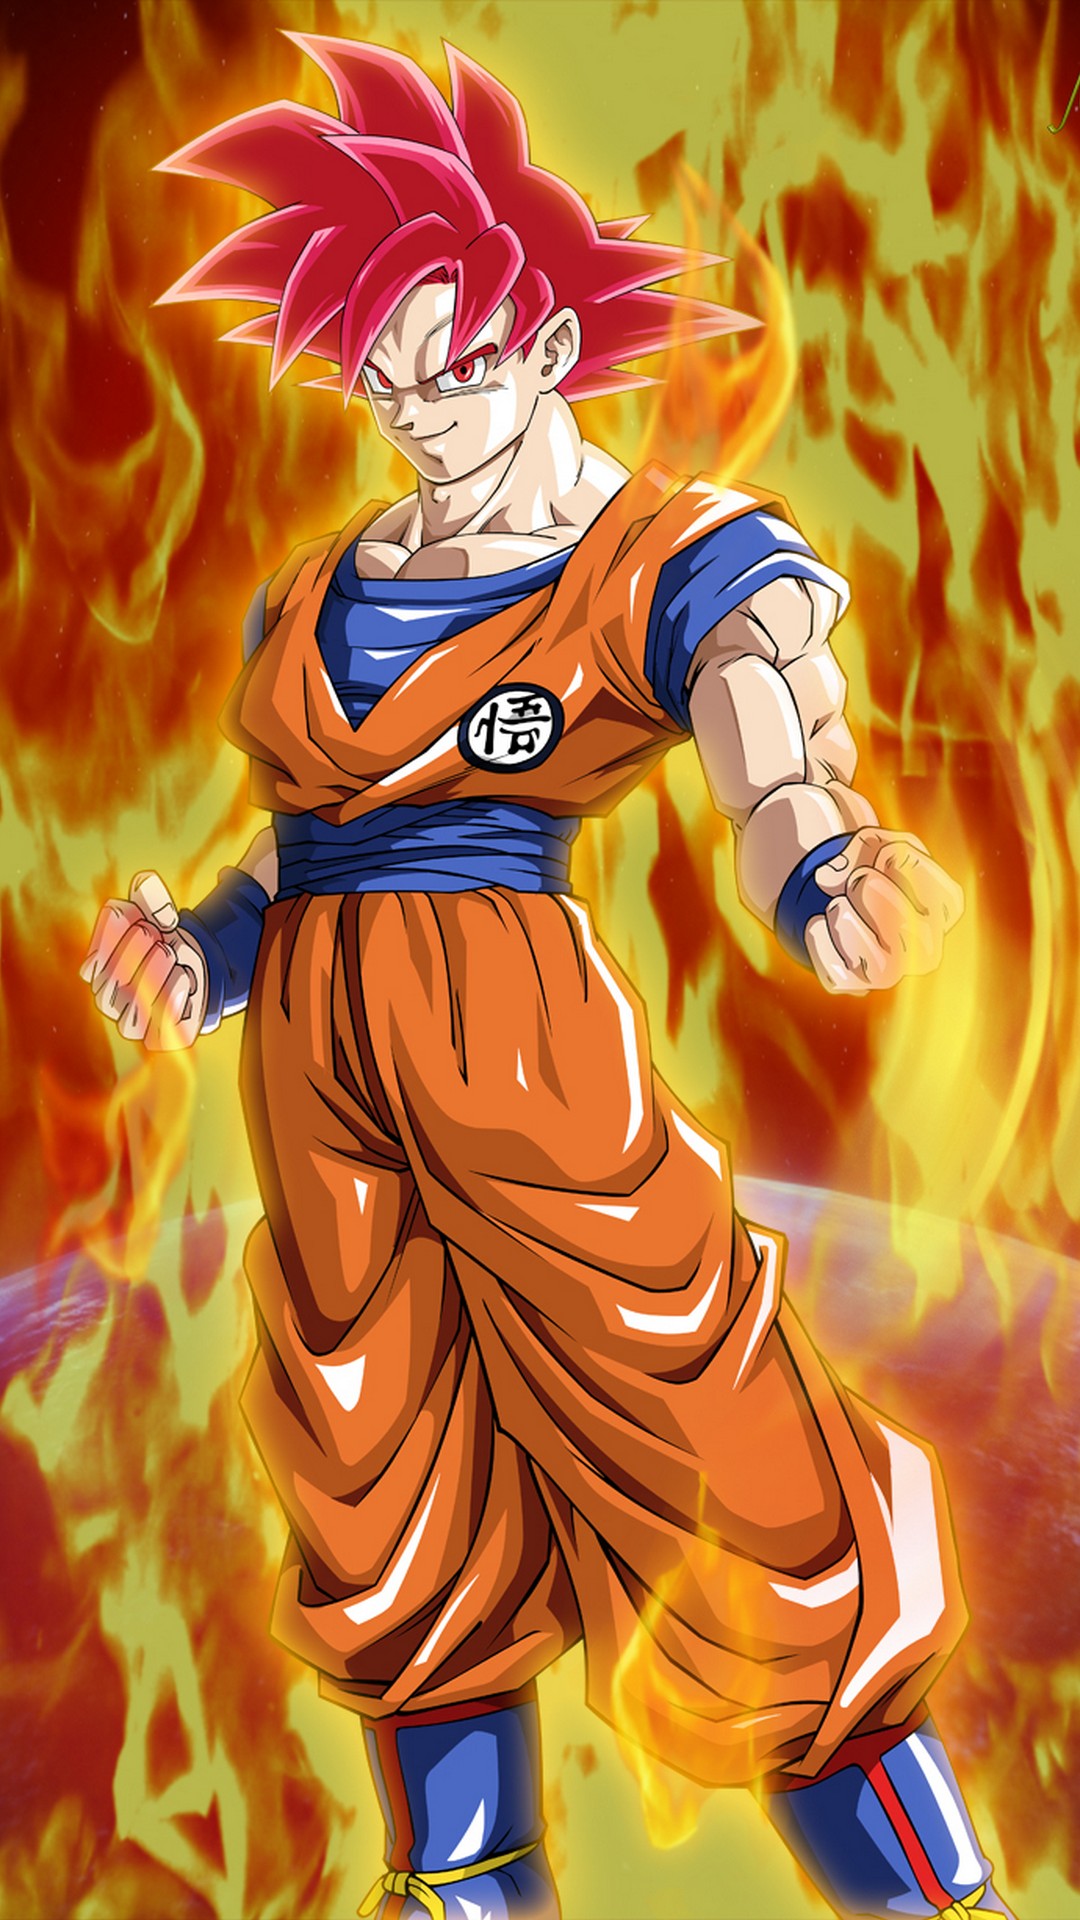 Wallpapers Goku Super Saiyan God with image resolution 1080x1920 pixel. You can make this wallpaper for your iPhone 5, 6, 7, 8, X backgrounds, Mobile Screensaver, or iPad Lock Screen